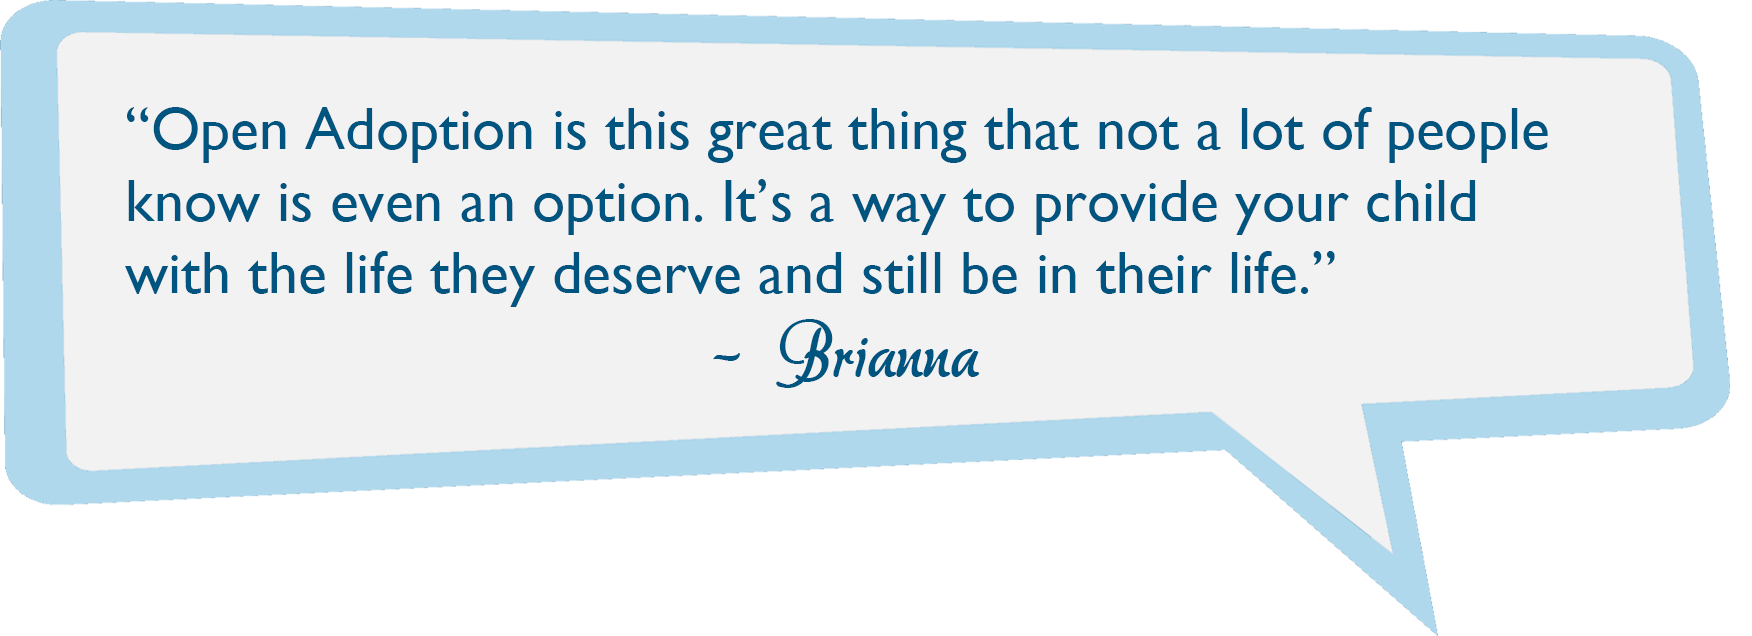 Open Adoptee Brianna's quote - Open adoption is a great thing that not a lot of people know is even an option. It is a great way to give your child the life they deserve and still be a part of their life.